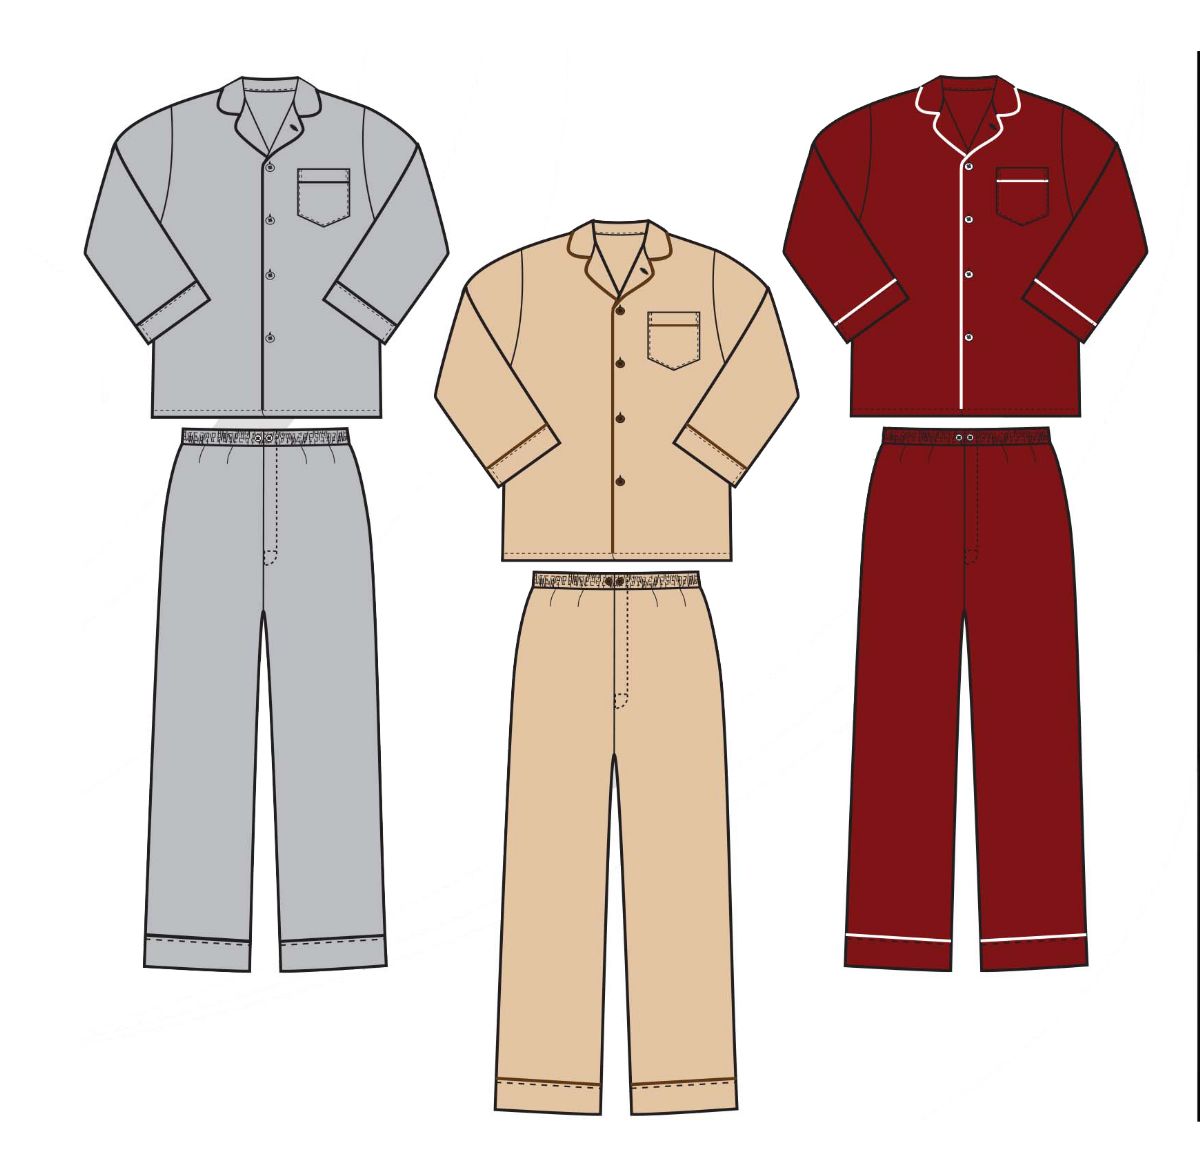 48 Sets of 2 Piece Mens Long Sleeve Pajama Set Assorted Colors And Sizes M-Xxl